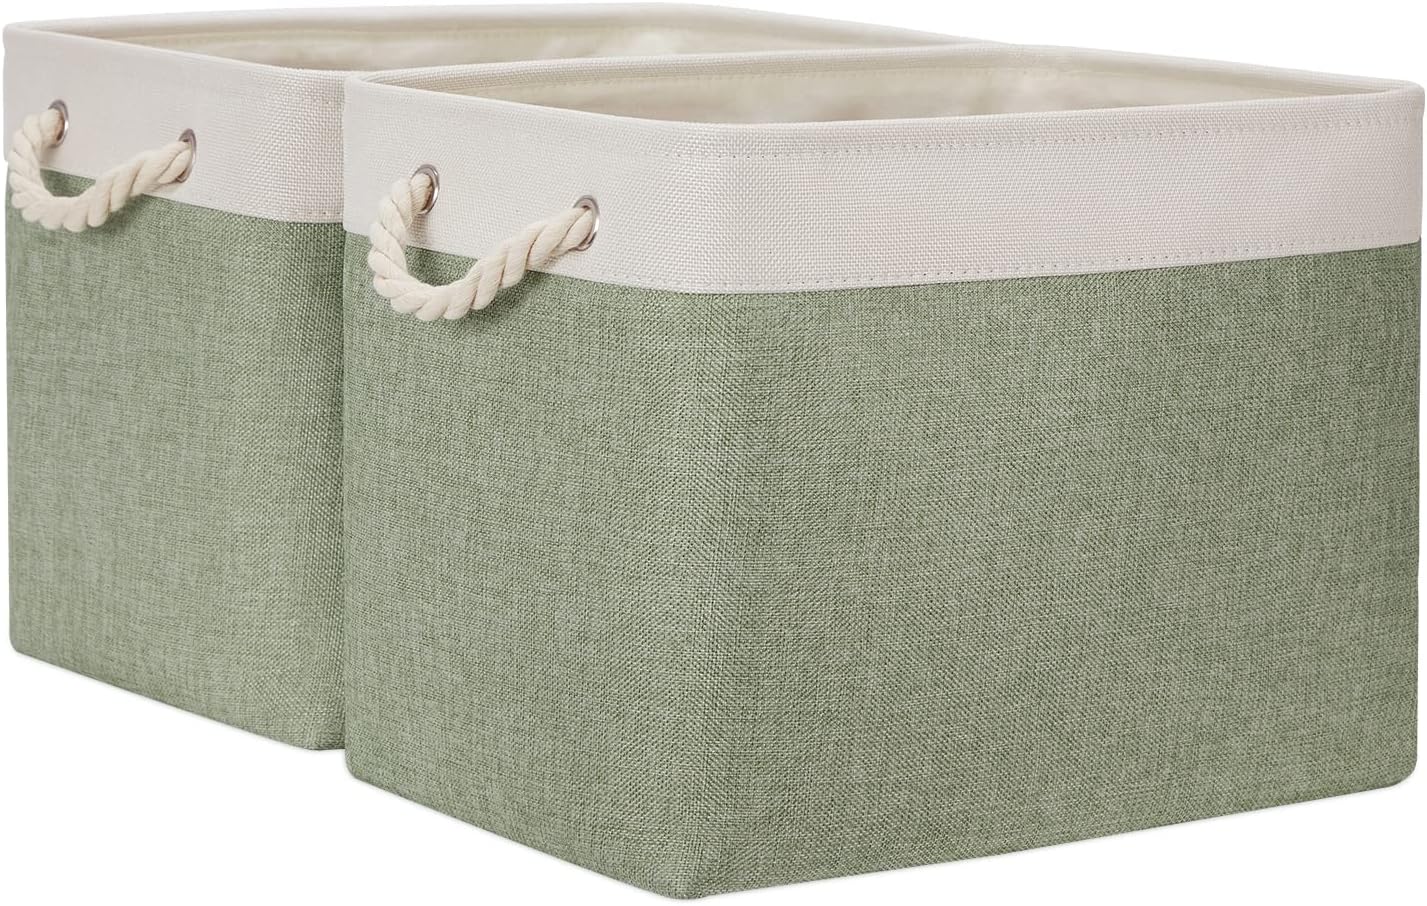 Temary Storage Baskets Fabric Storage Bins for Shelves, 2 Pack Decorative Storage Boxes Canvas Storage Basket with Handles for Organizing Toys, Baby Clothes, Books(White&Green,16Lx12Wx12H Inches)